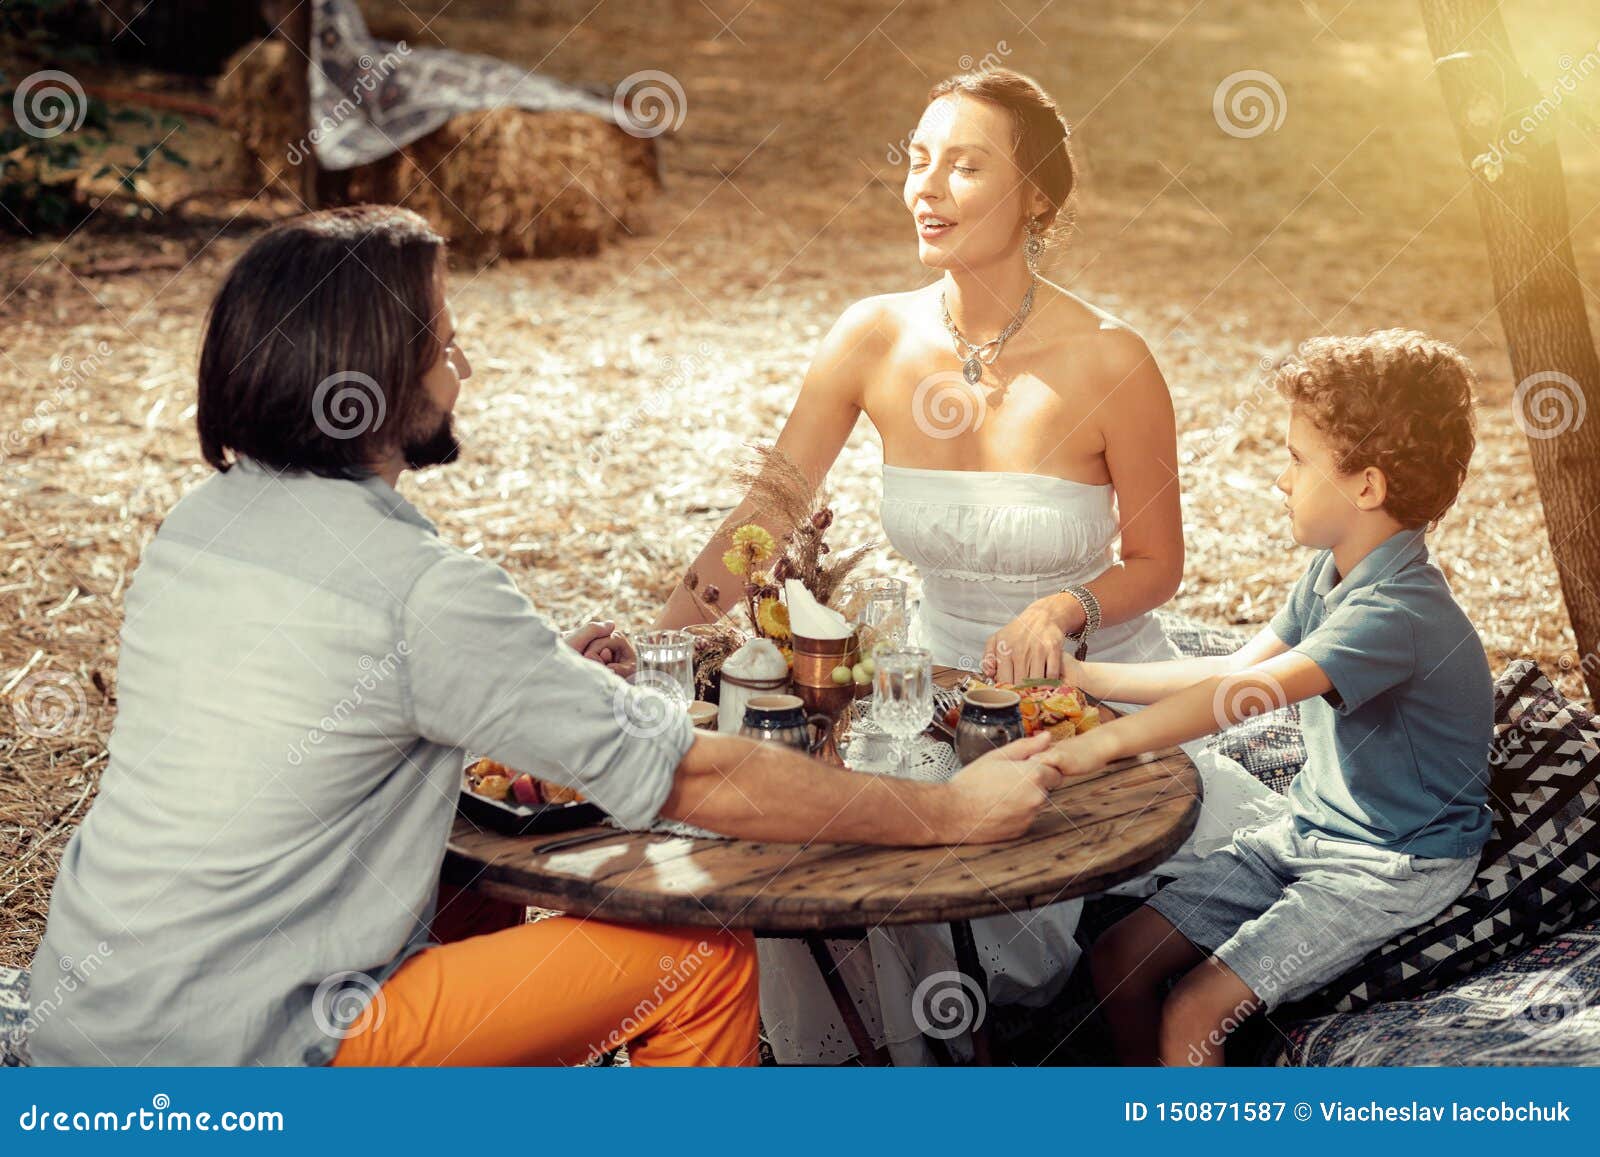 Delighted Peaceful Family Sitting Together Around the Table Stock Image